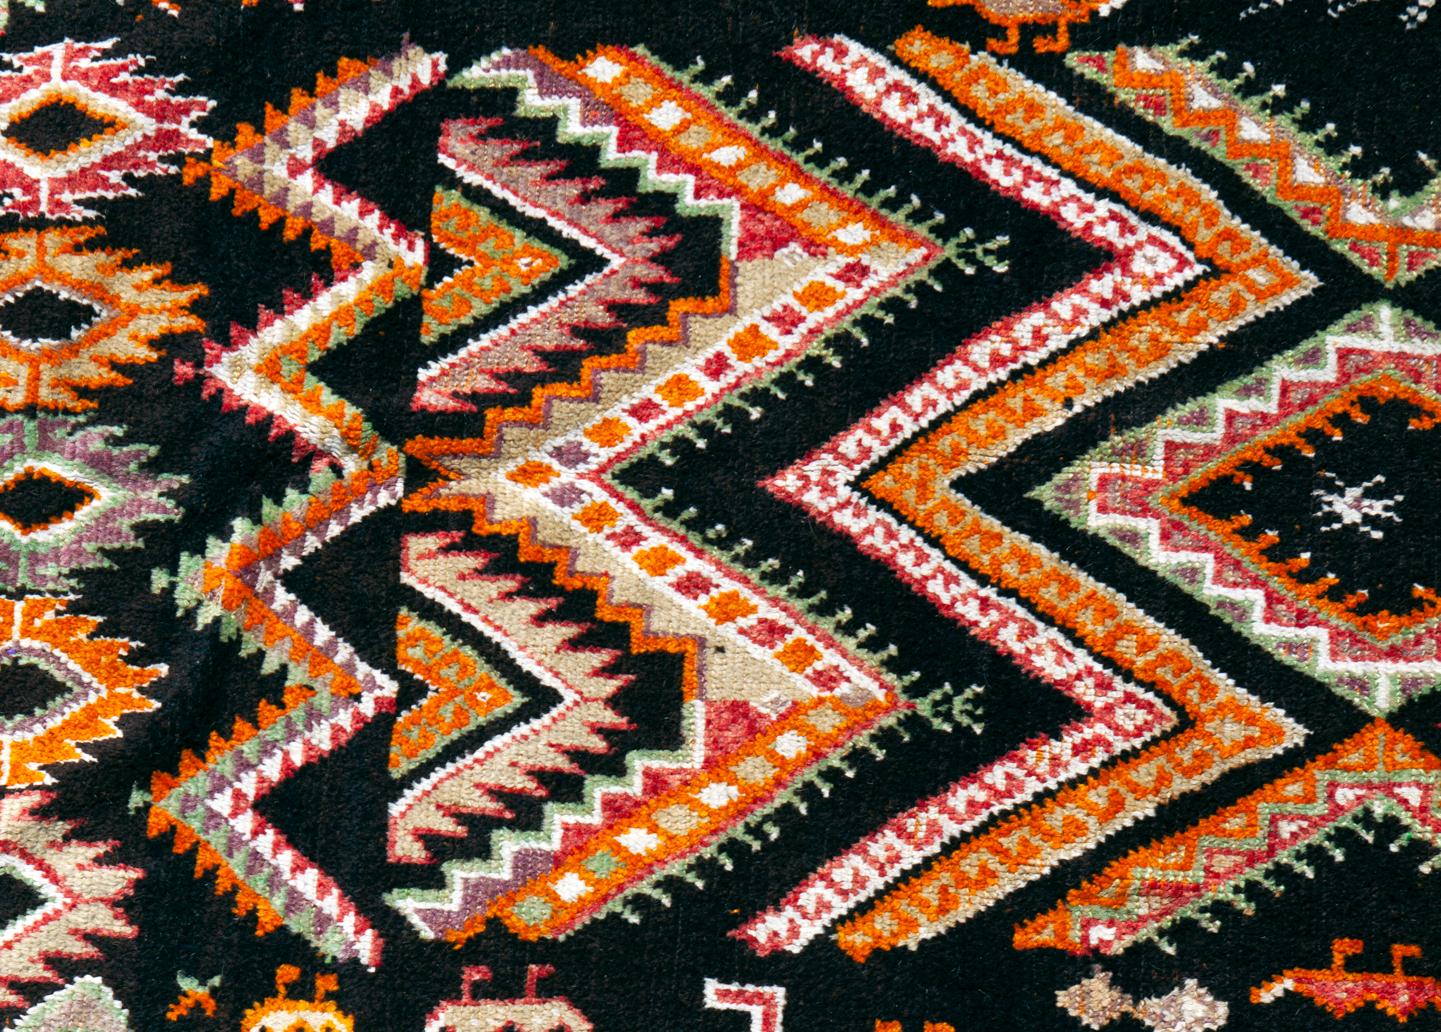 A one-of-a-kind oversized runner.
Woven in a tribal village that specializes in weaving these vivacious Berber patterns.
The wool has been vegetable dyed in earth tones.
Purchased from the personal collection of the late actress, Anne Hecht.